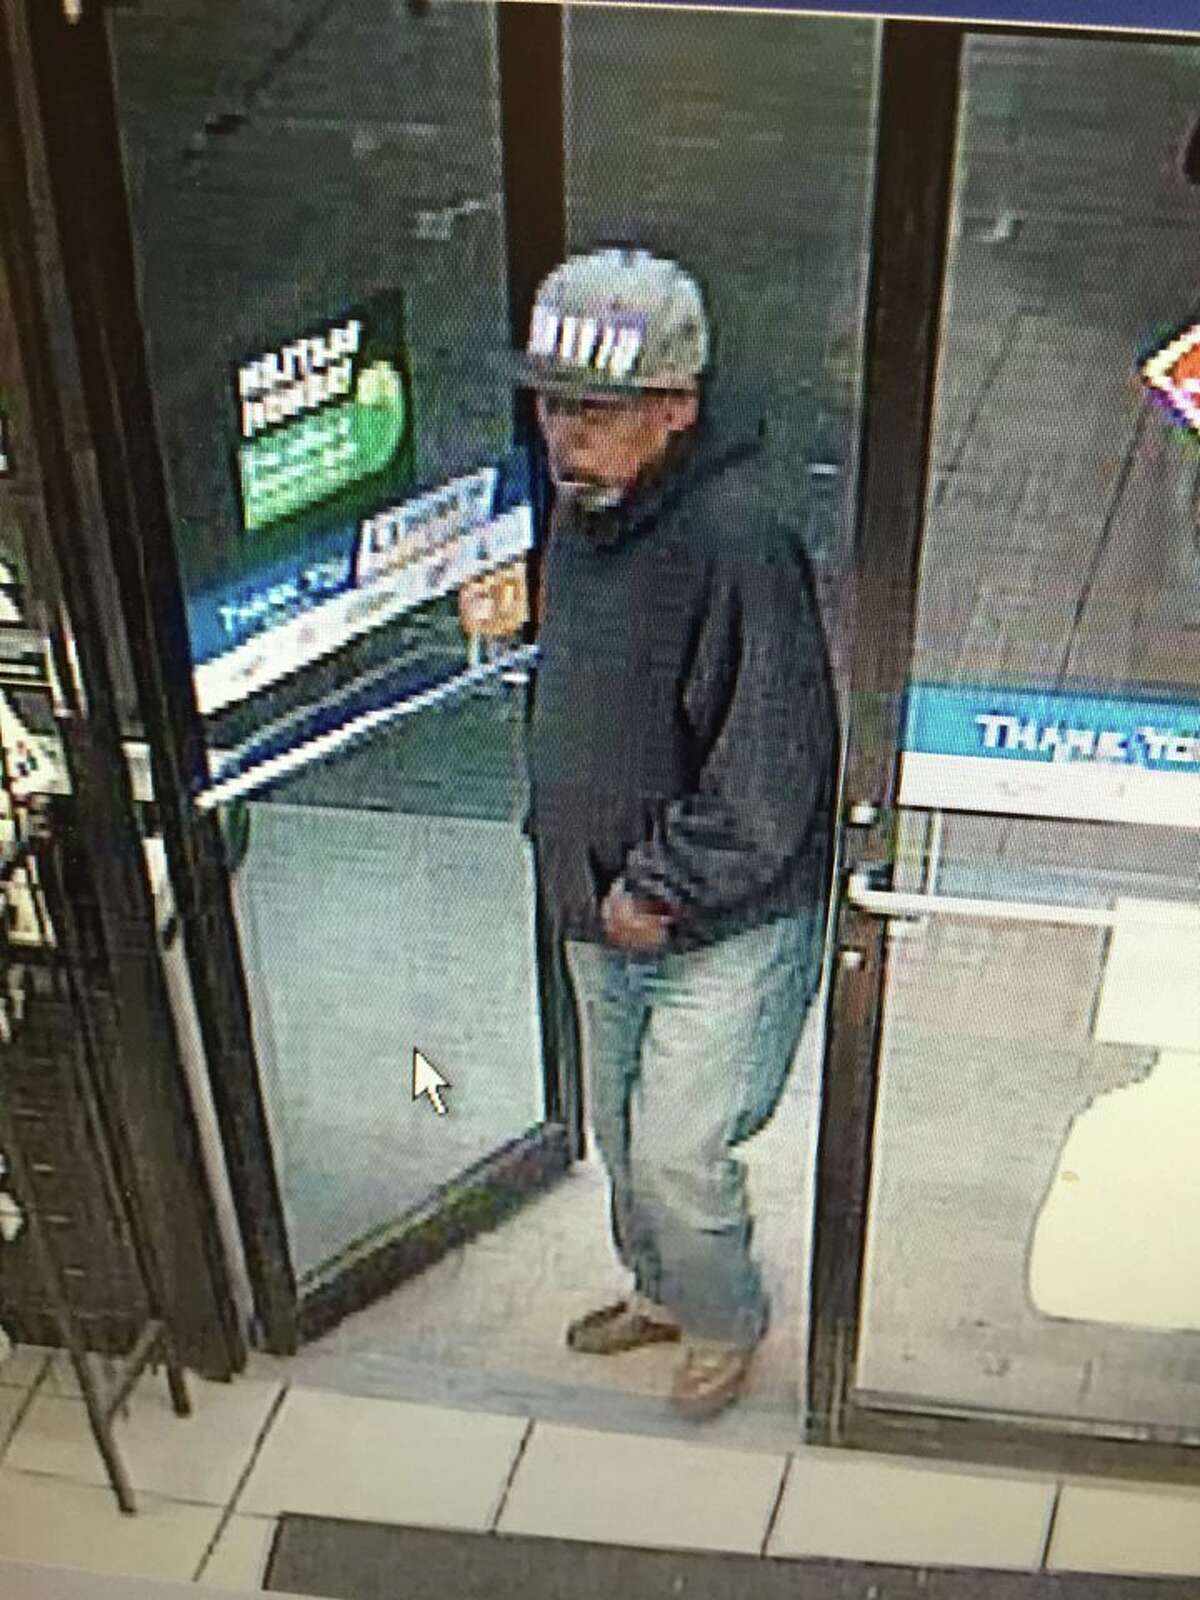 Police are looking for this man suspected of robbing a Valero convenience store at 12070 Blanco Road on March 12, 2016.